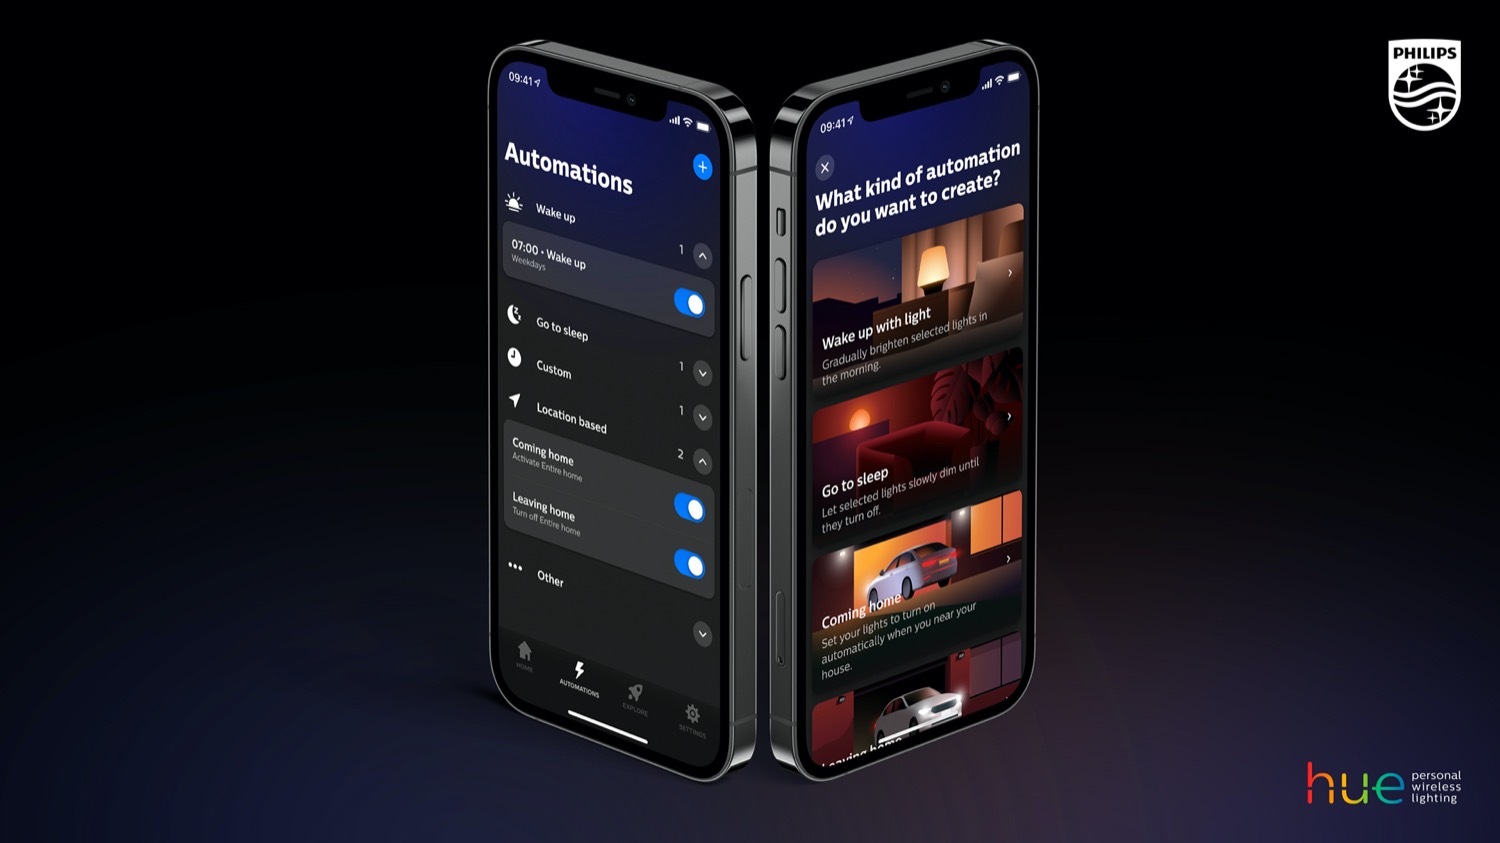 Hueblog: New Philips Hue App is available for download